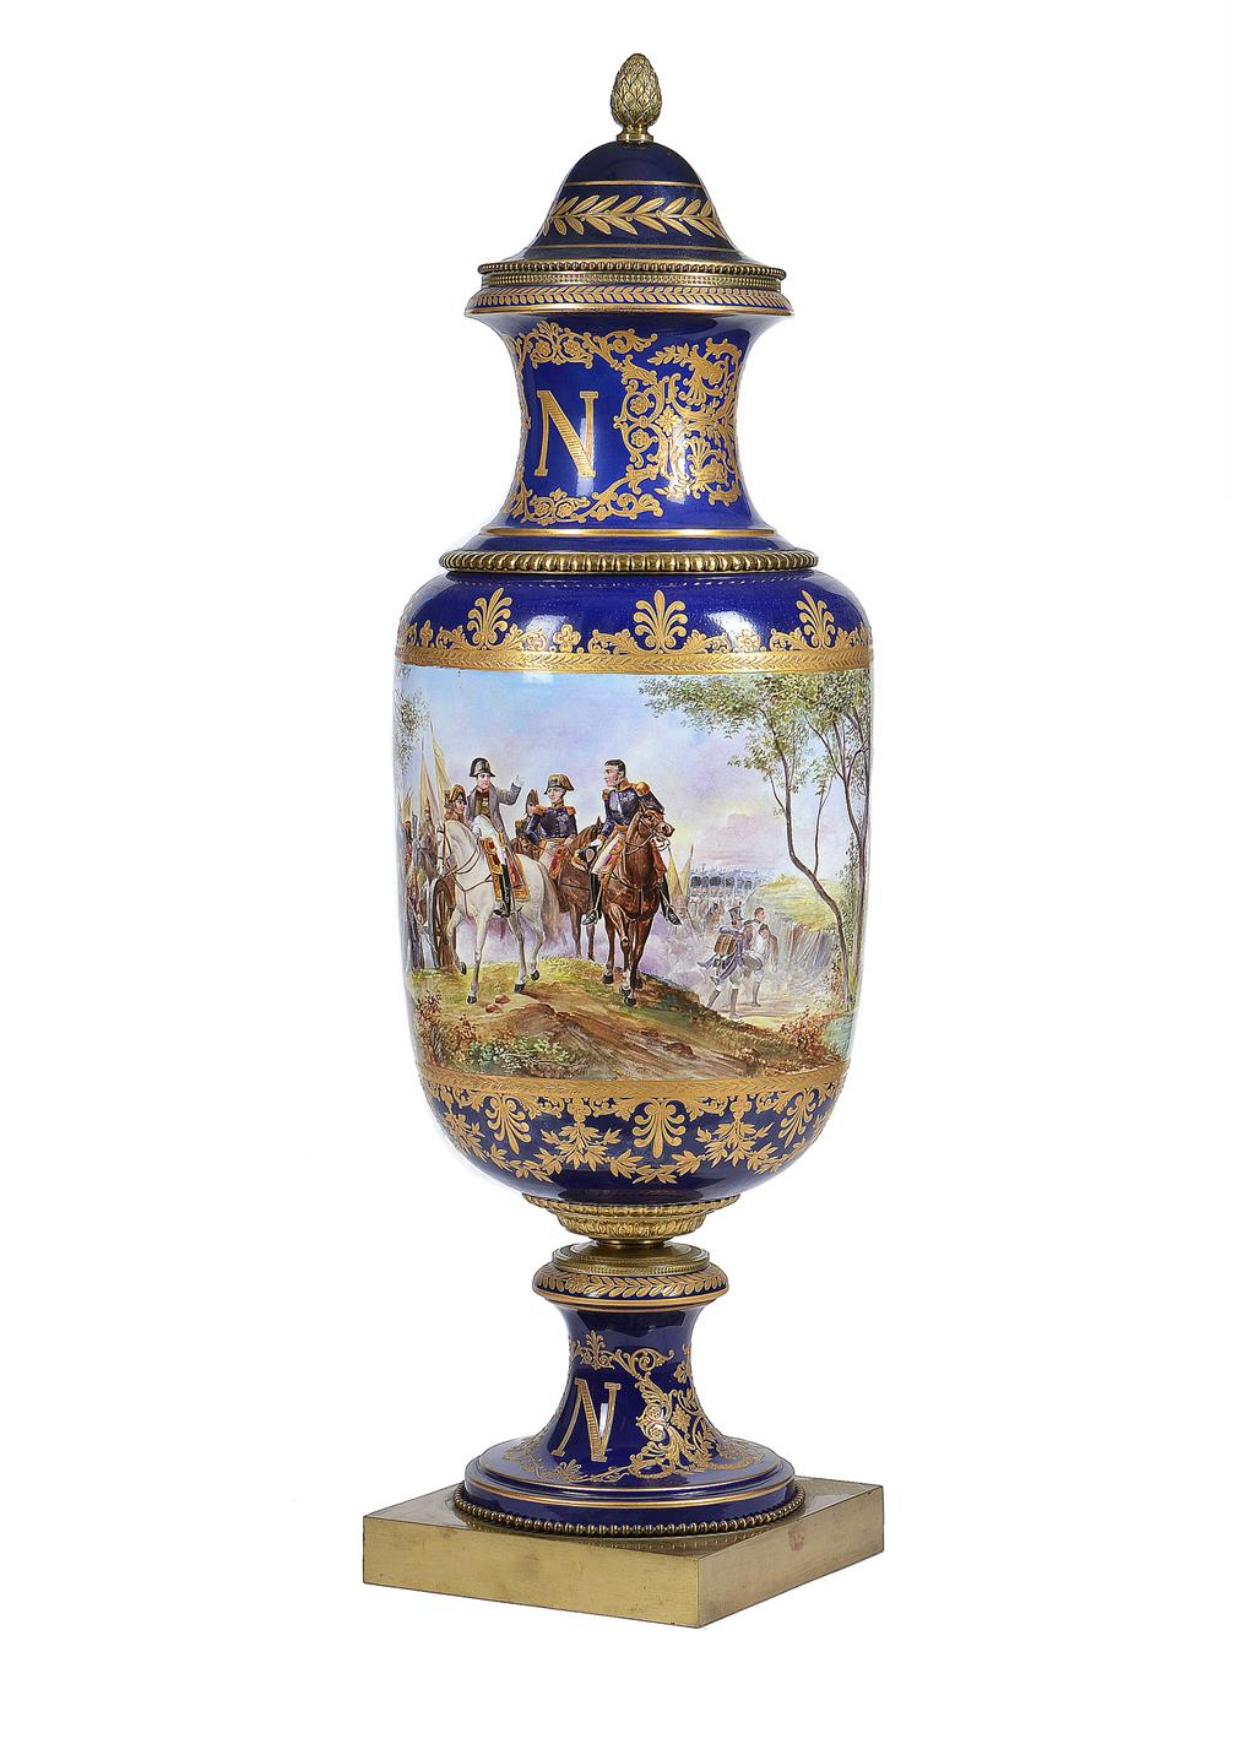 A pair of Sevres style pottery gilt-metal mounted vases and covers decorated in the Imperial manner, circa 1900, painted with battle scenes after Horace Vernet of Bonaparte at the battles of Friedland and Wagram, signed H.F.M. Faraguet, reserved on